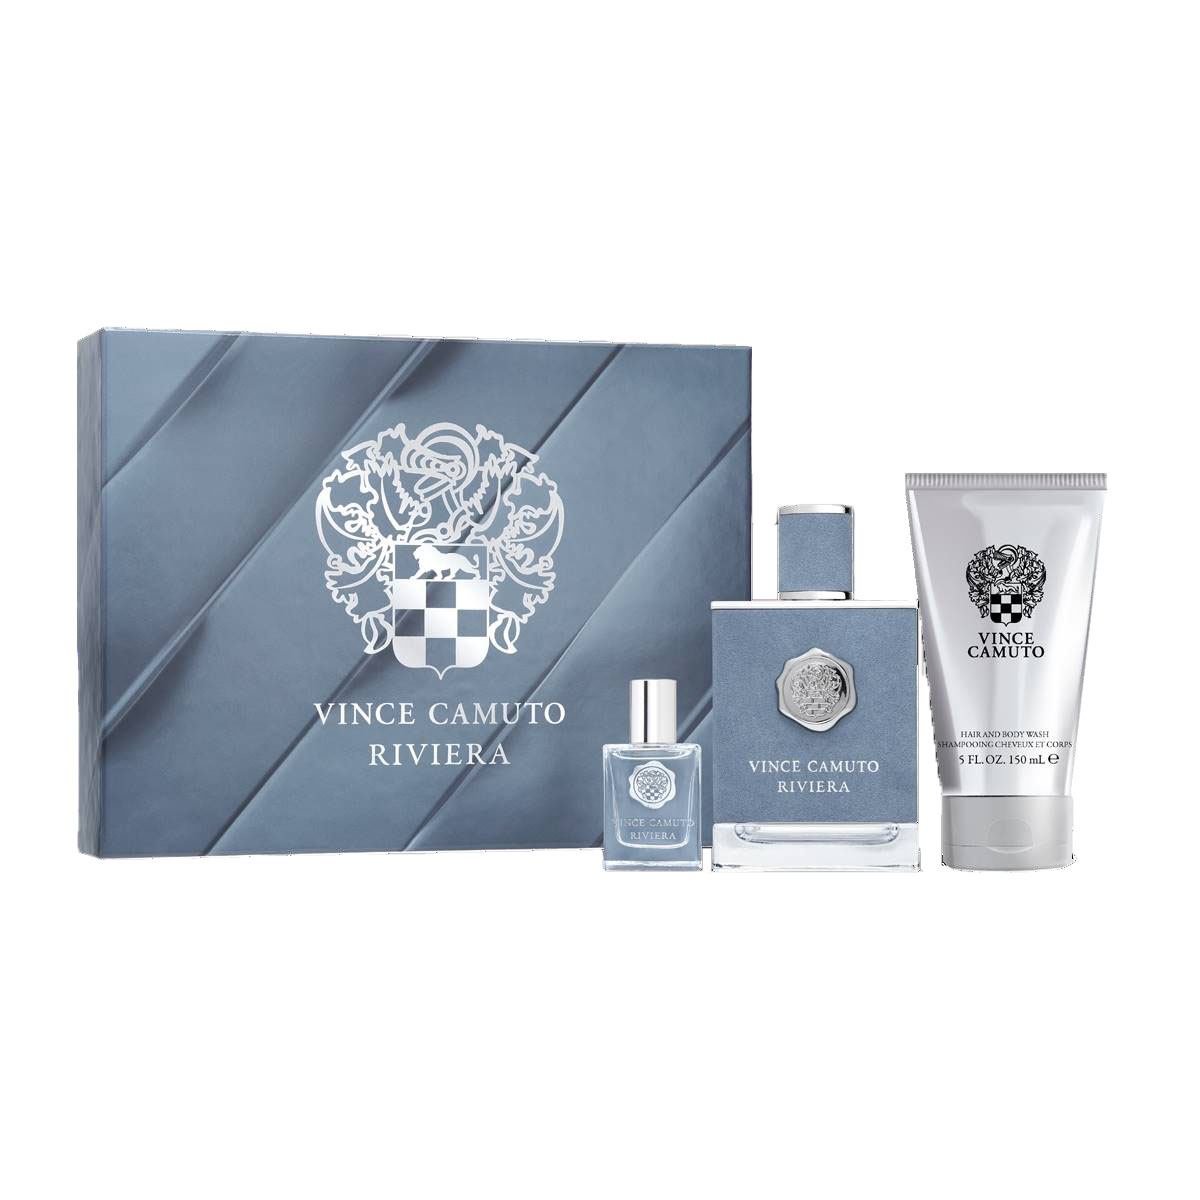 Vince Camuto Riviera 3pc. Cologne Gift Set - Value $139.00